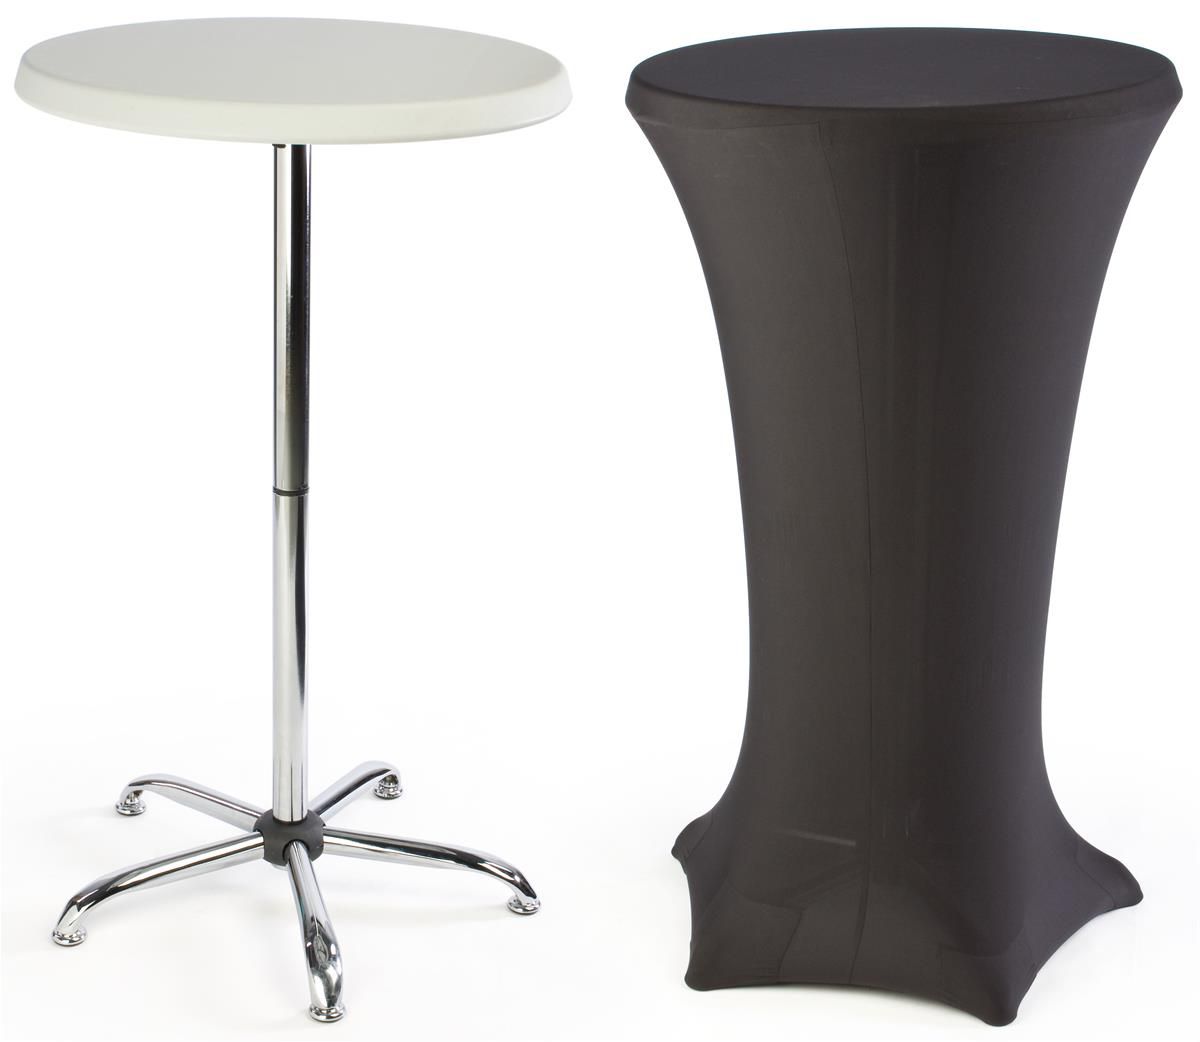 27" X 47" Table W/ Fitted Black Spandex (View 13 of 20)